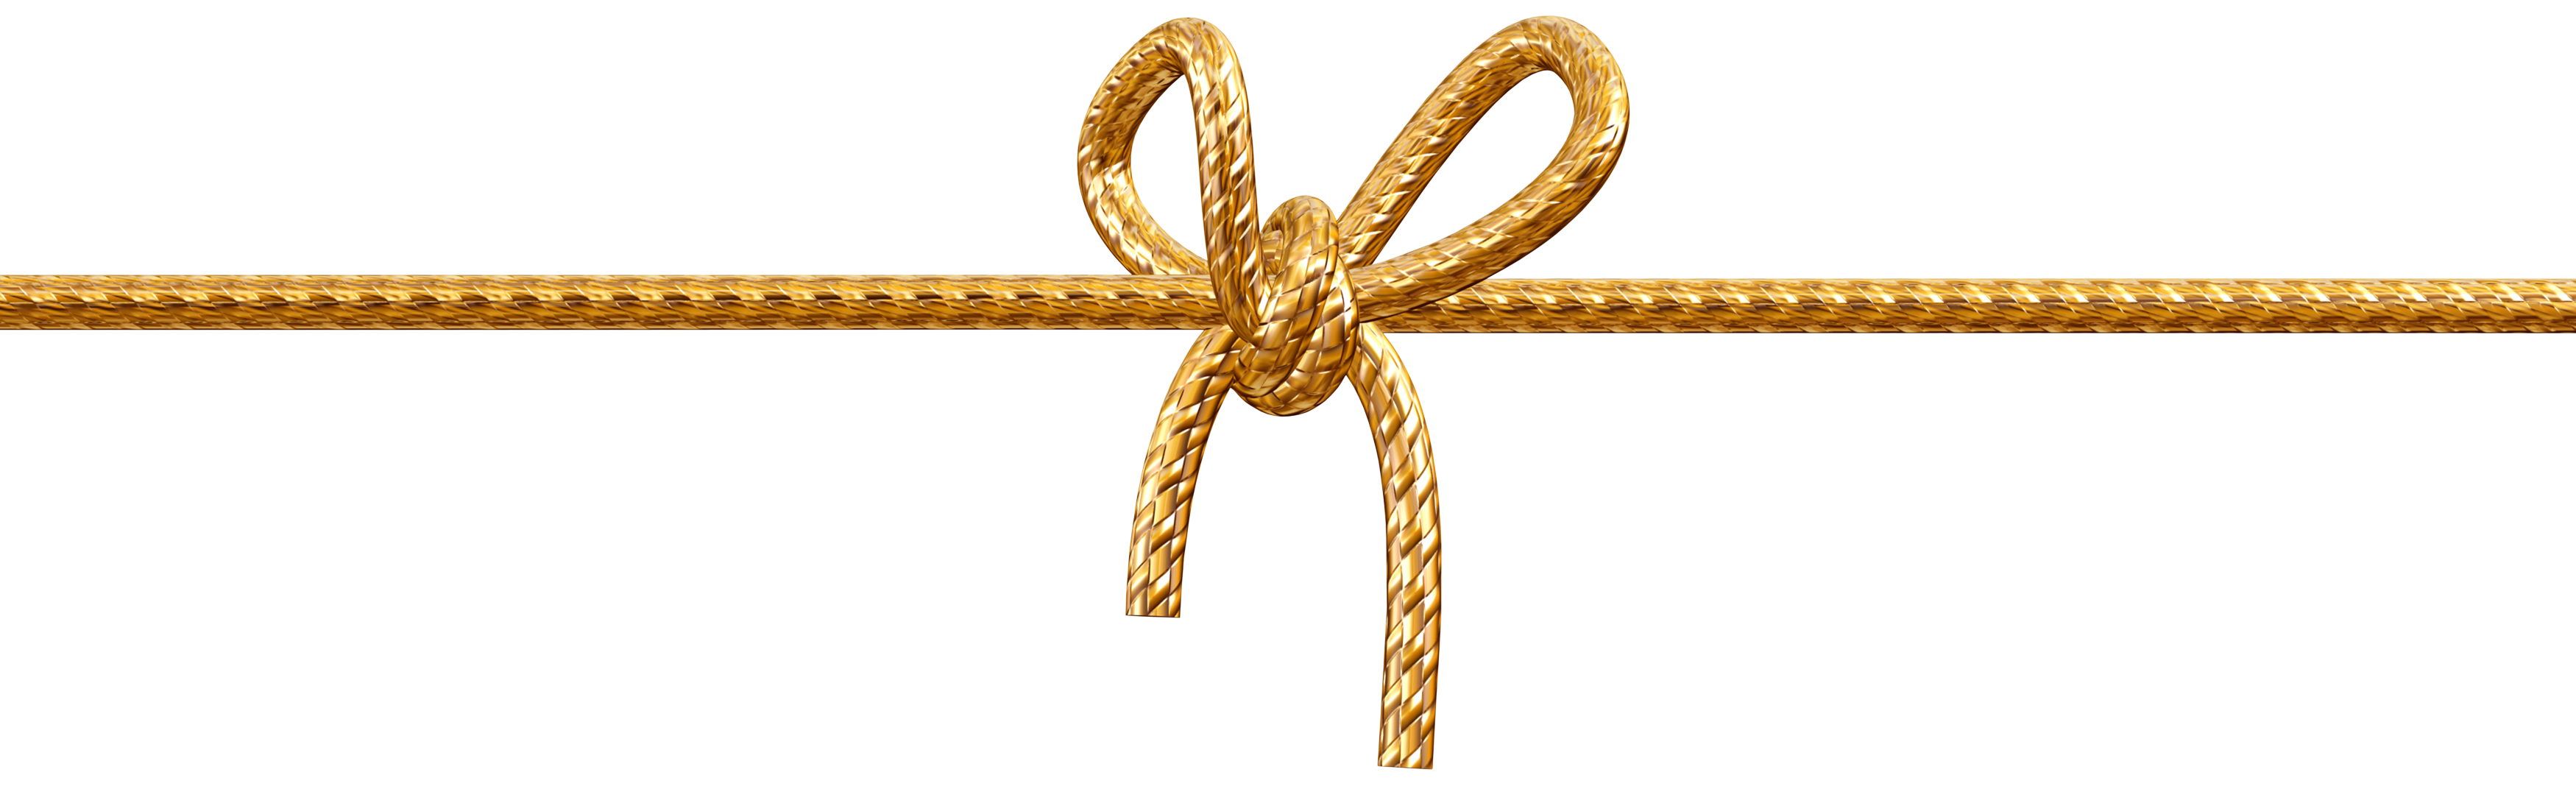 rope knot PNG transparent image download, size: 3500x1072px